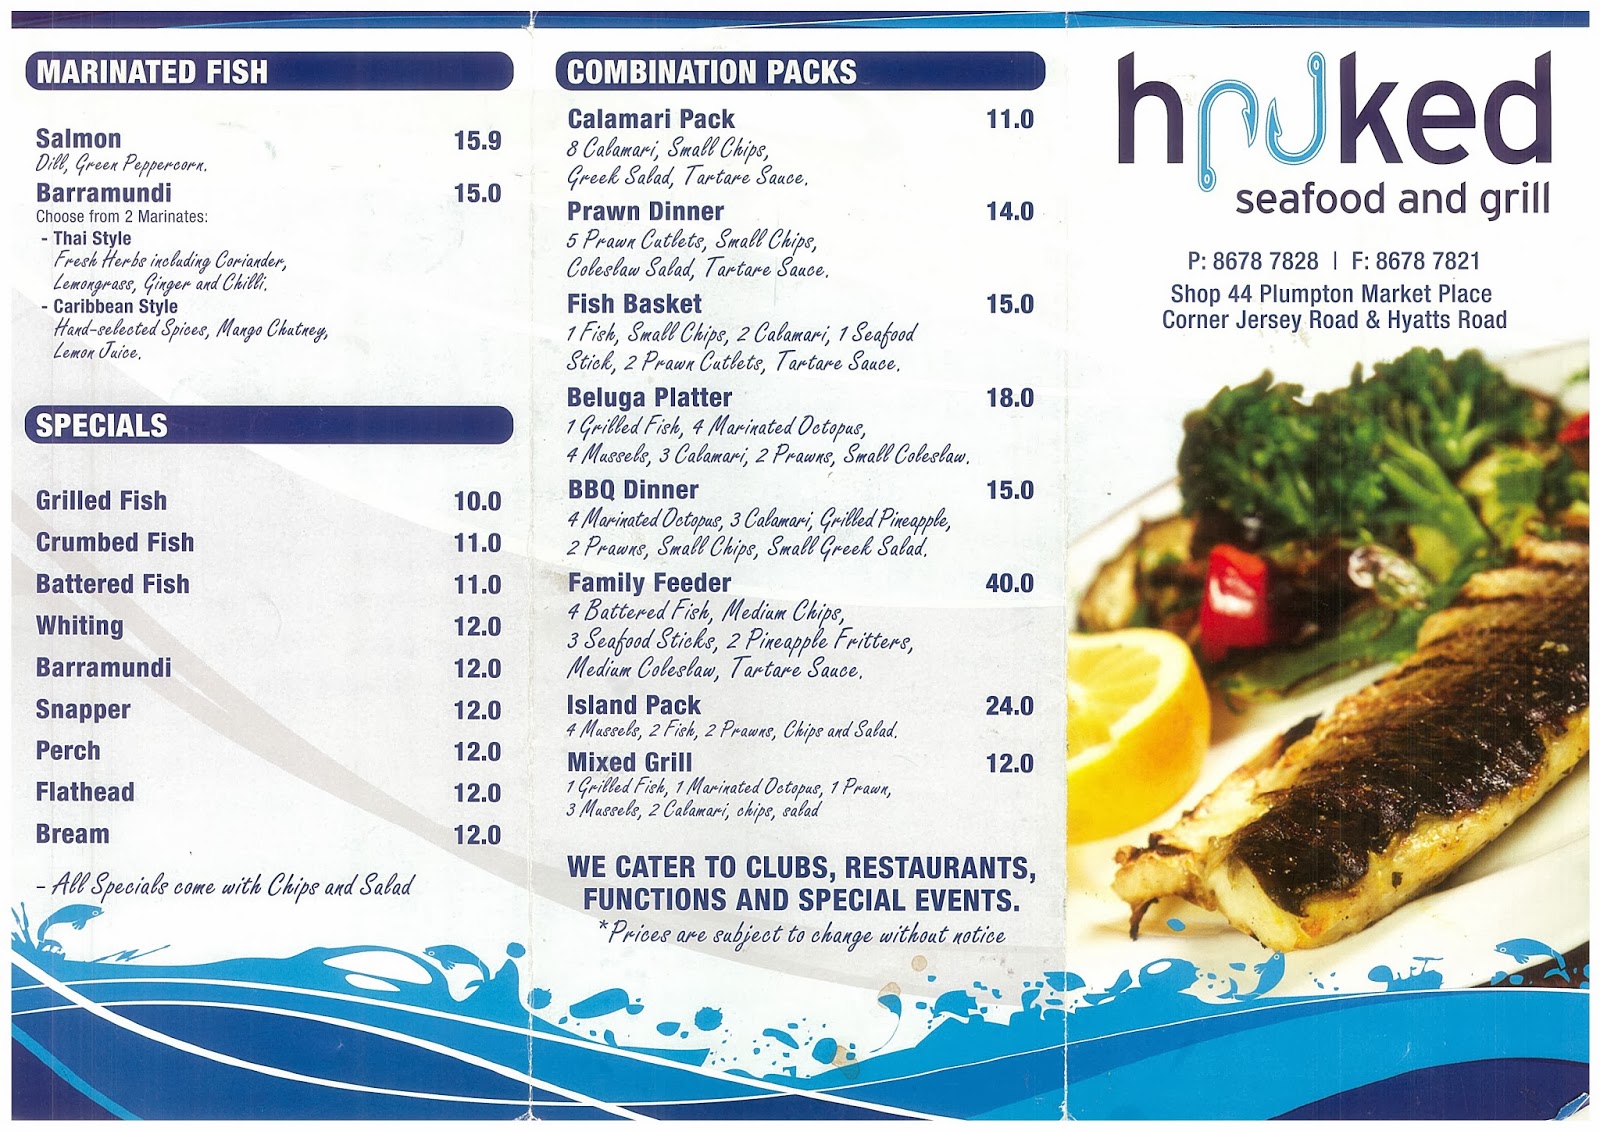 My Local Menu: Hooked Seafood and Grill Menu